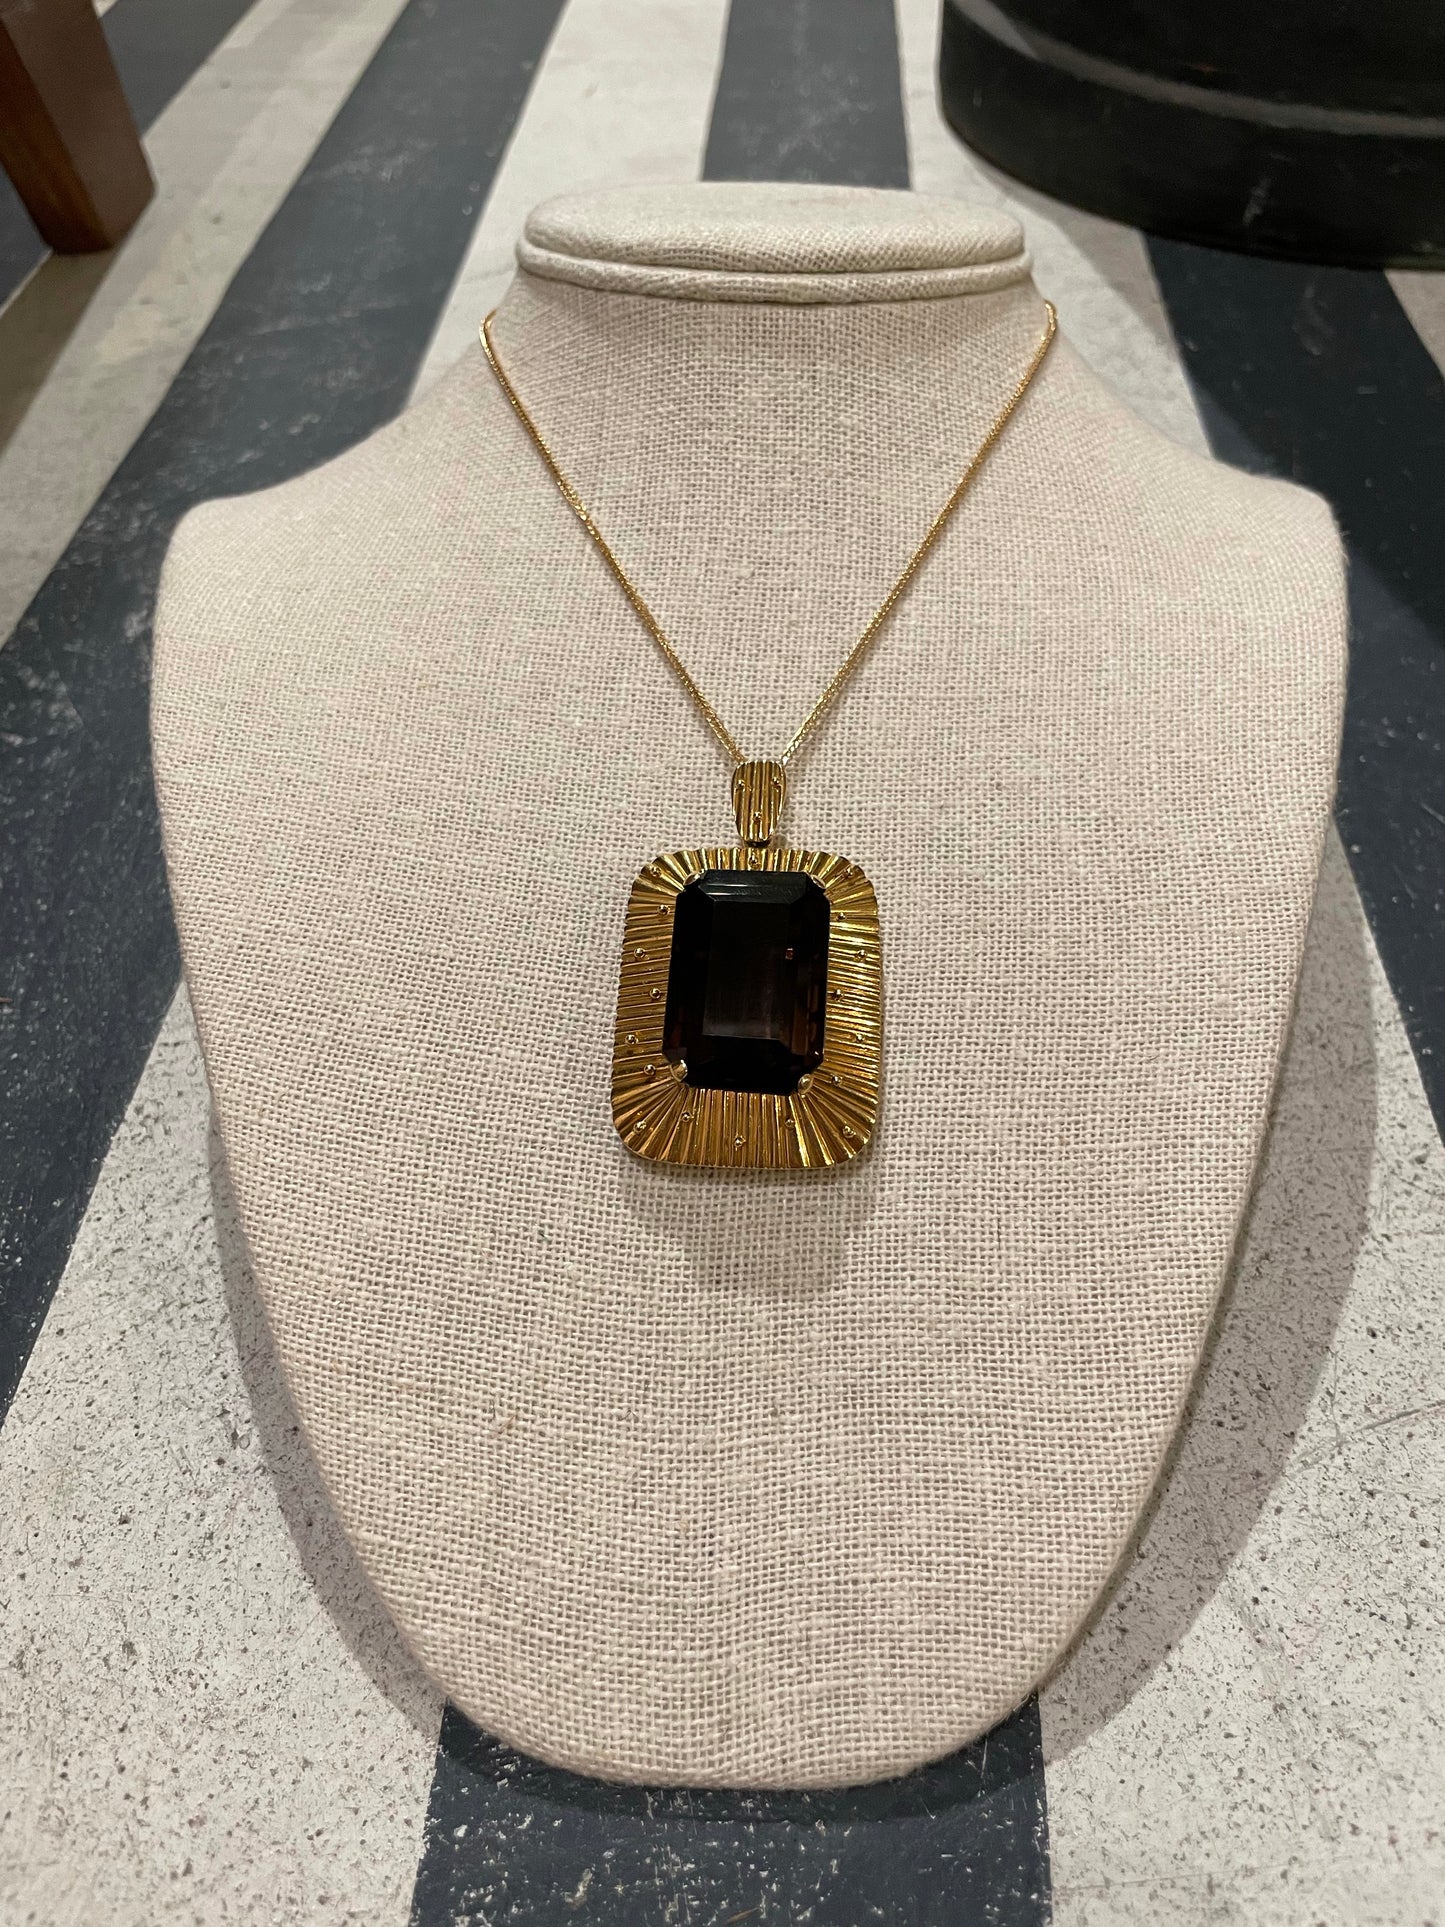 Mt. Modern vintage 18k yellow gold Pendant necklace with Smokey Quartz and 18k adjustable wheat chain - Alchemy Works